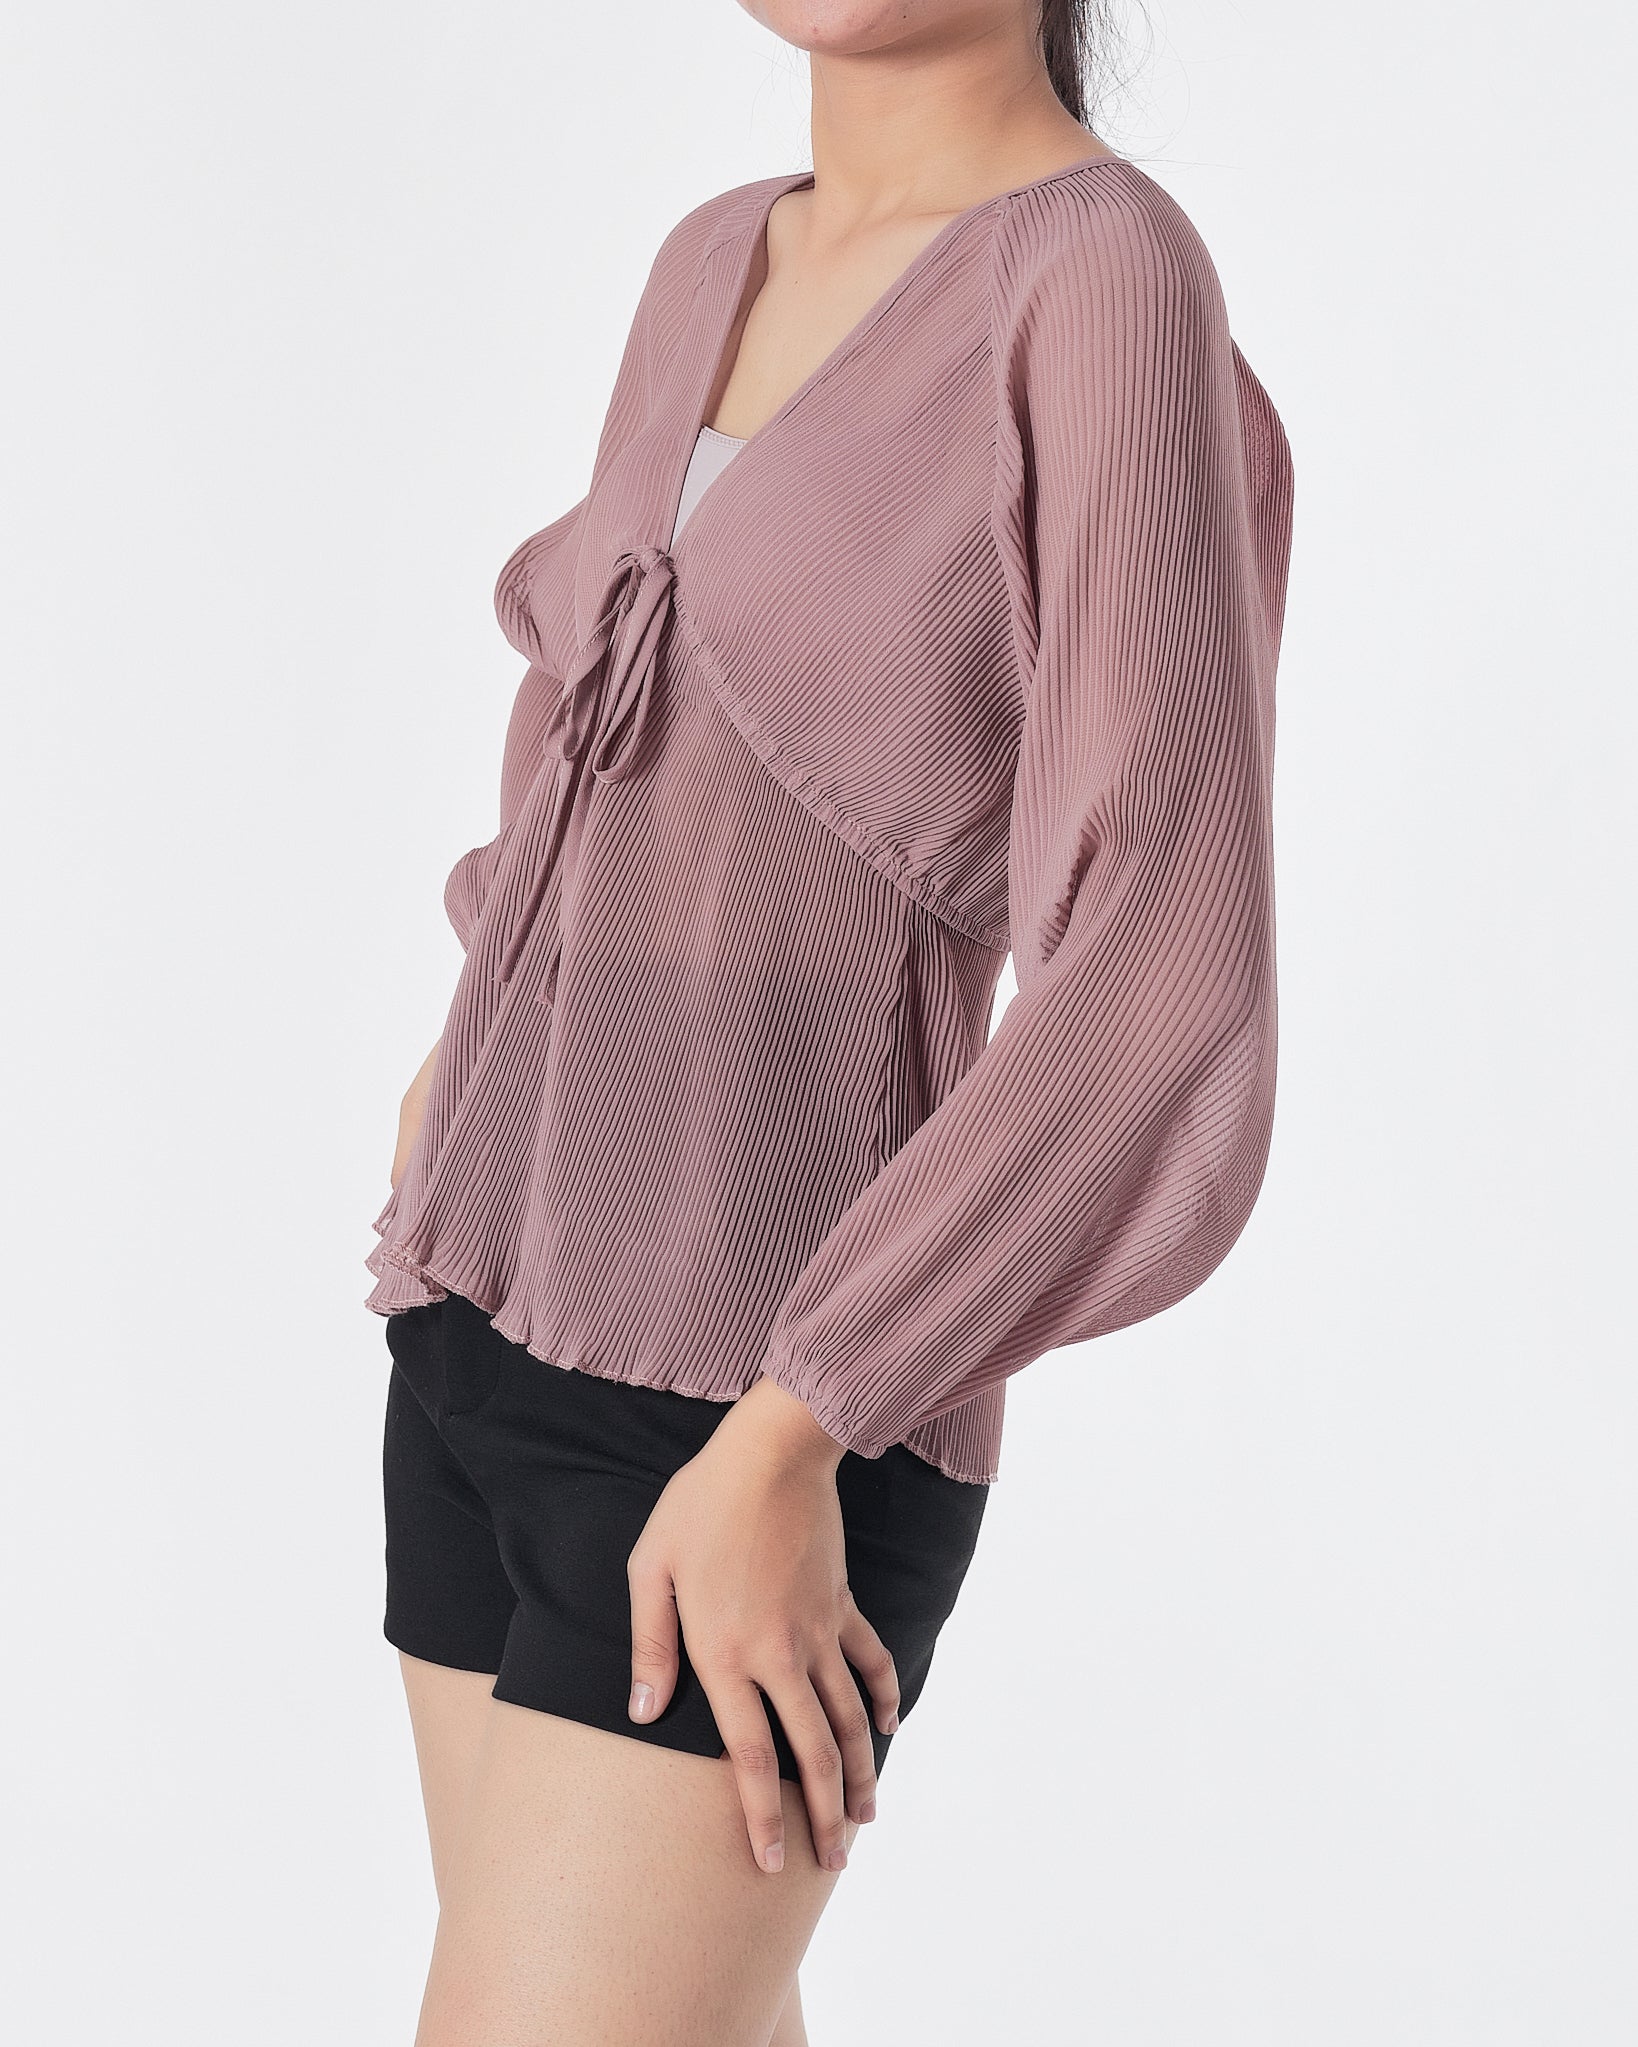 Lady Pleated Pink  Shirts Long Sleeve 14.90